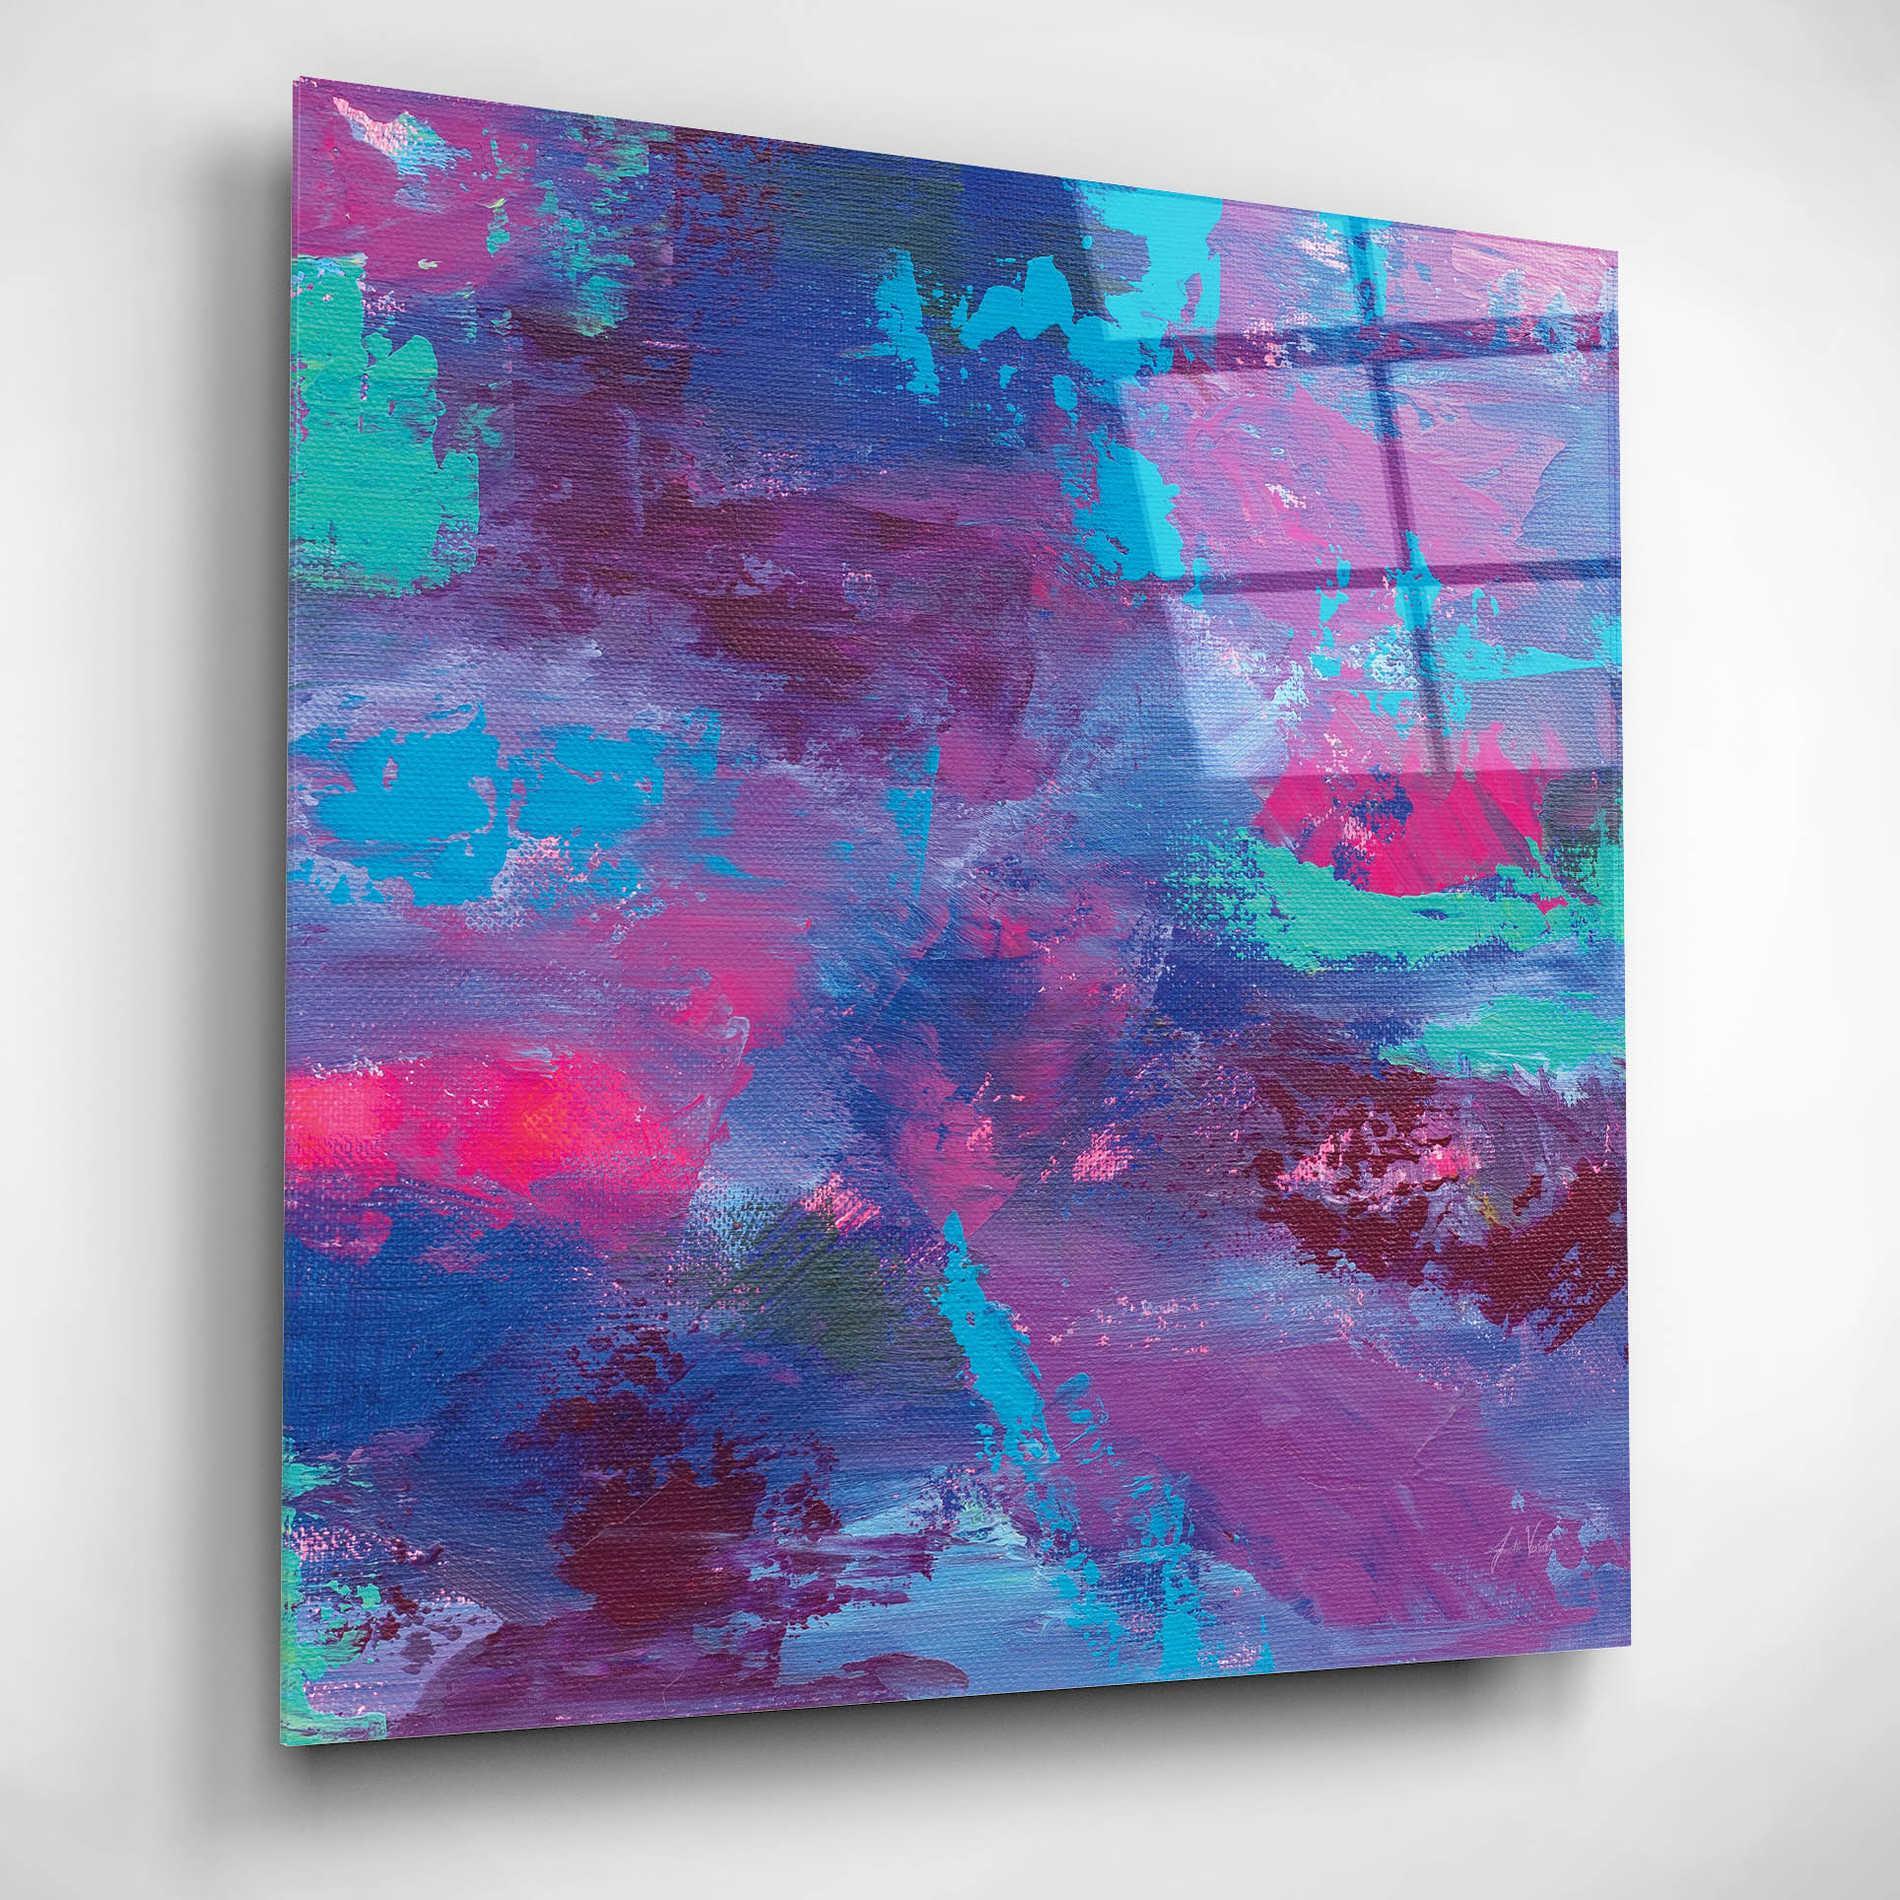 Epic Art 'Delight' by Jeanette Vertentes, Acrylic Glass Wall Art,12x12